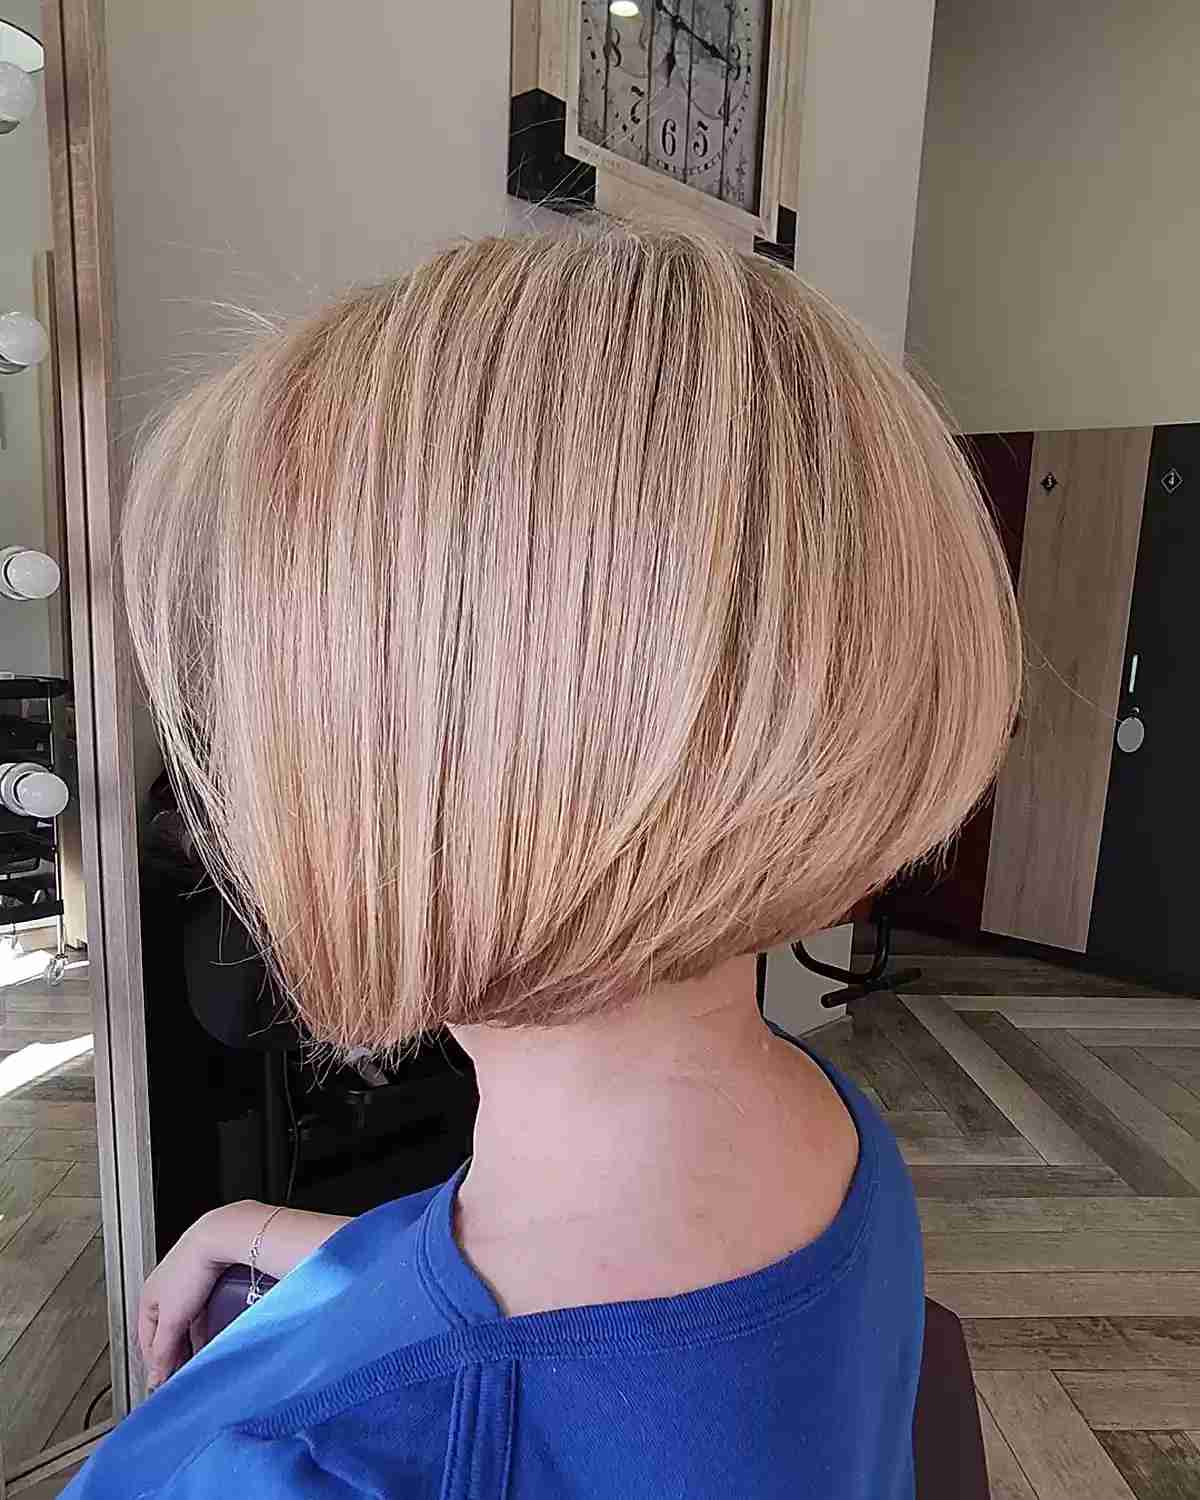 Chic Blonde Bob Style with Layers cut at neck-length